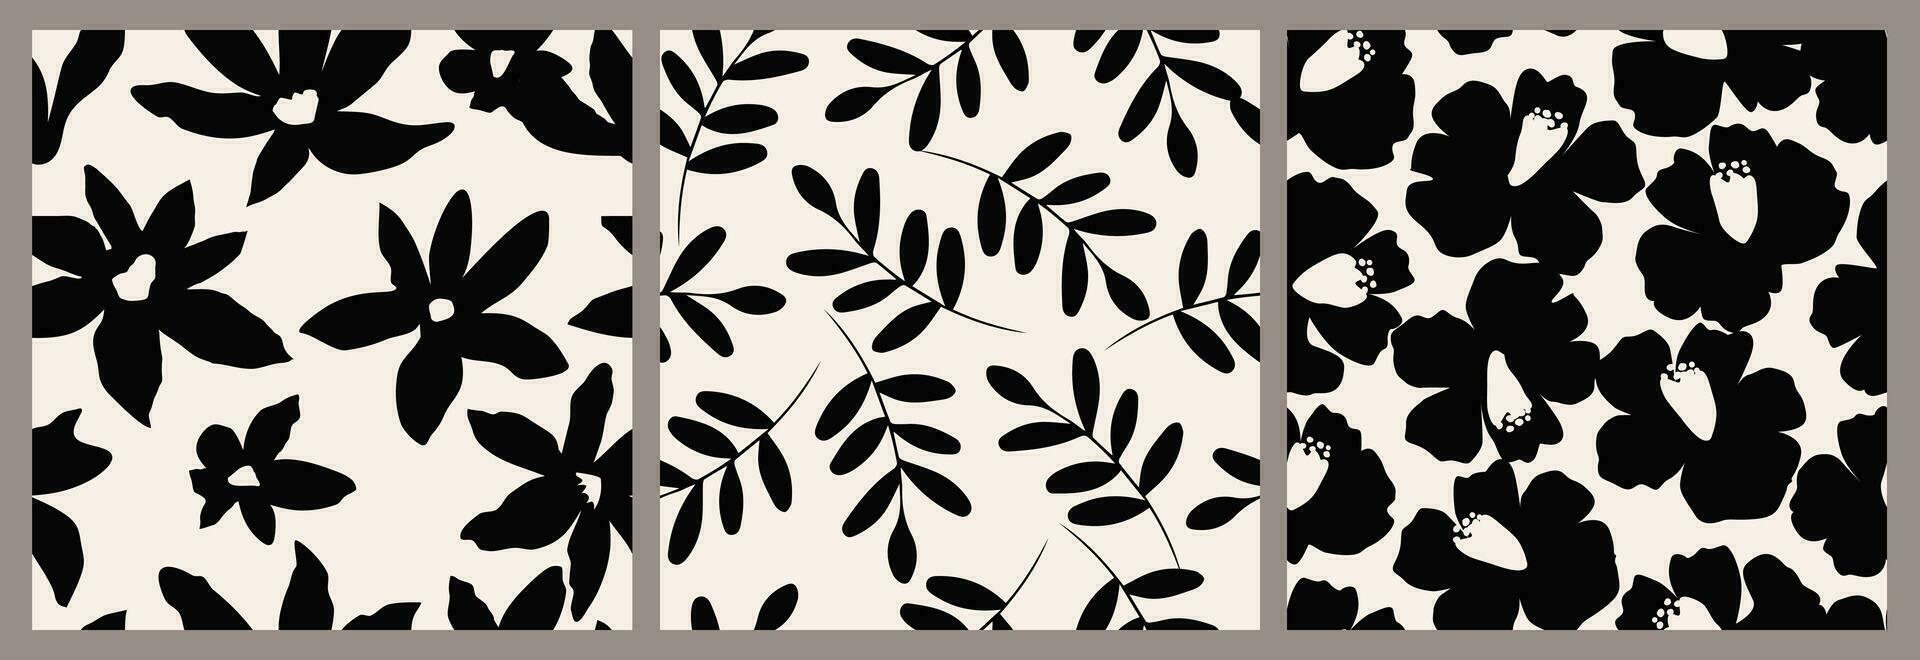 Set of flower seamless background. Minimalistic abstract floral pattern. Modern print in black and white background. Ideal for textile design, wallpaper, covers, cards, invitations and posters. vector